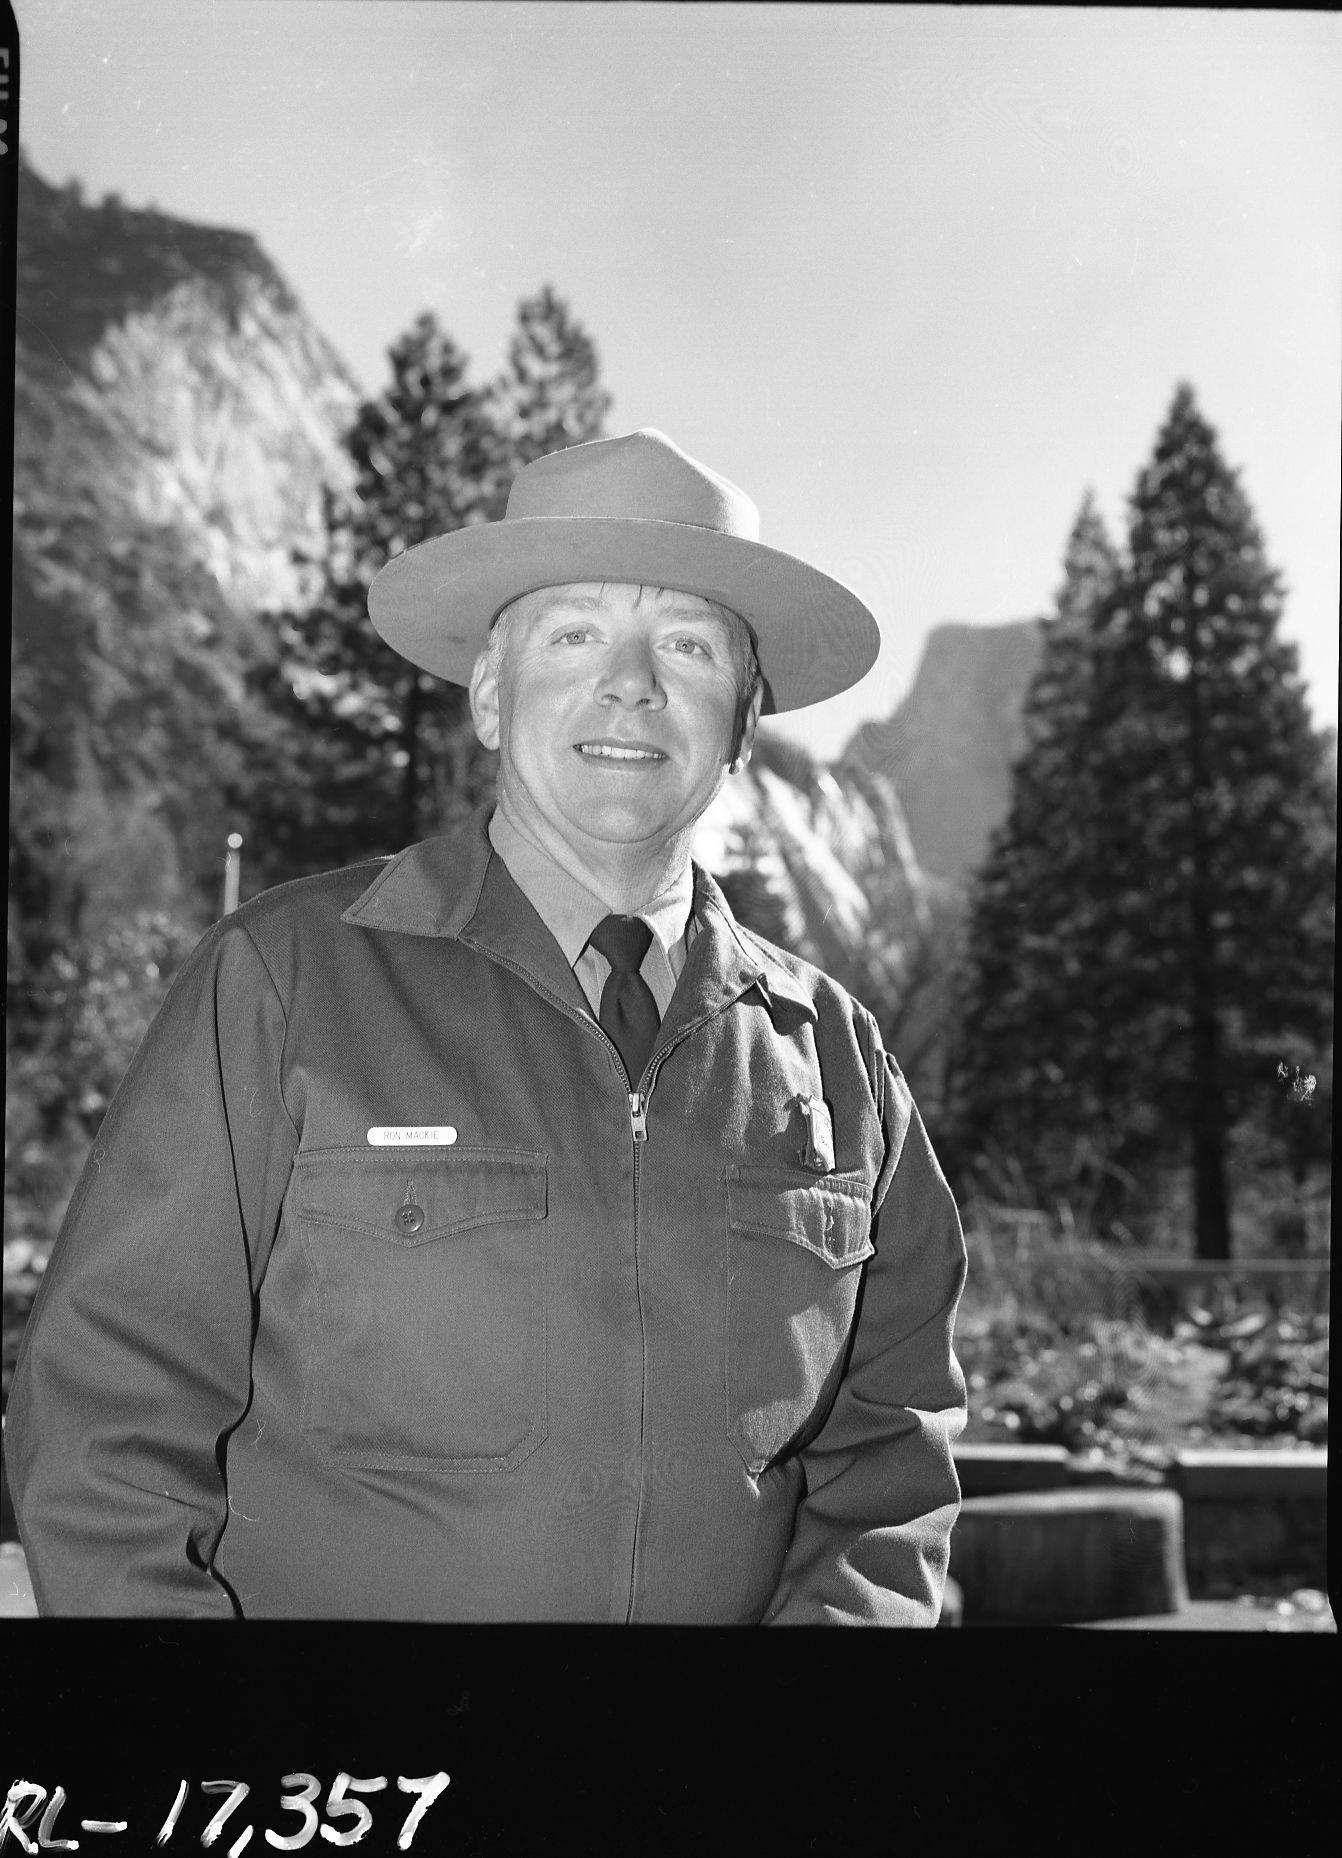 Ron Mackie, Wilderness Unit Manager, YNP. Head of Backcountry Management